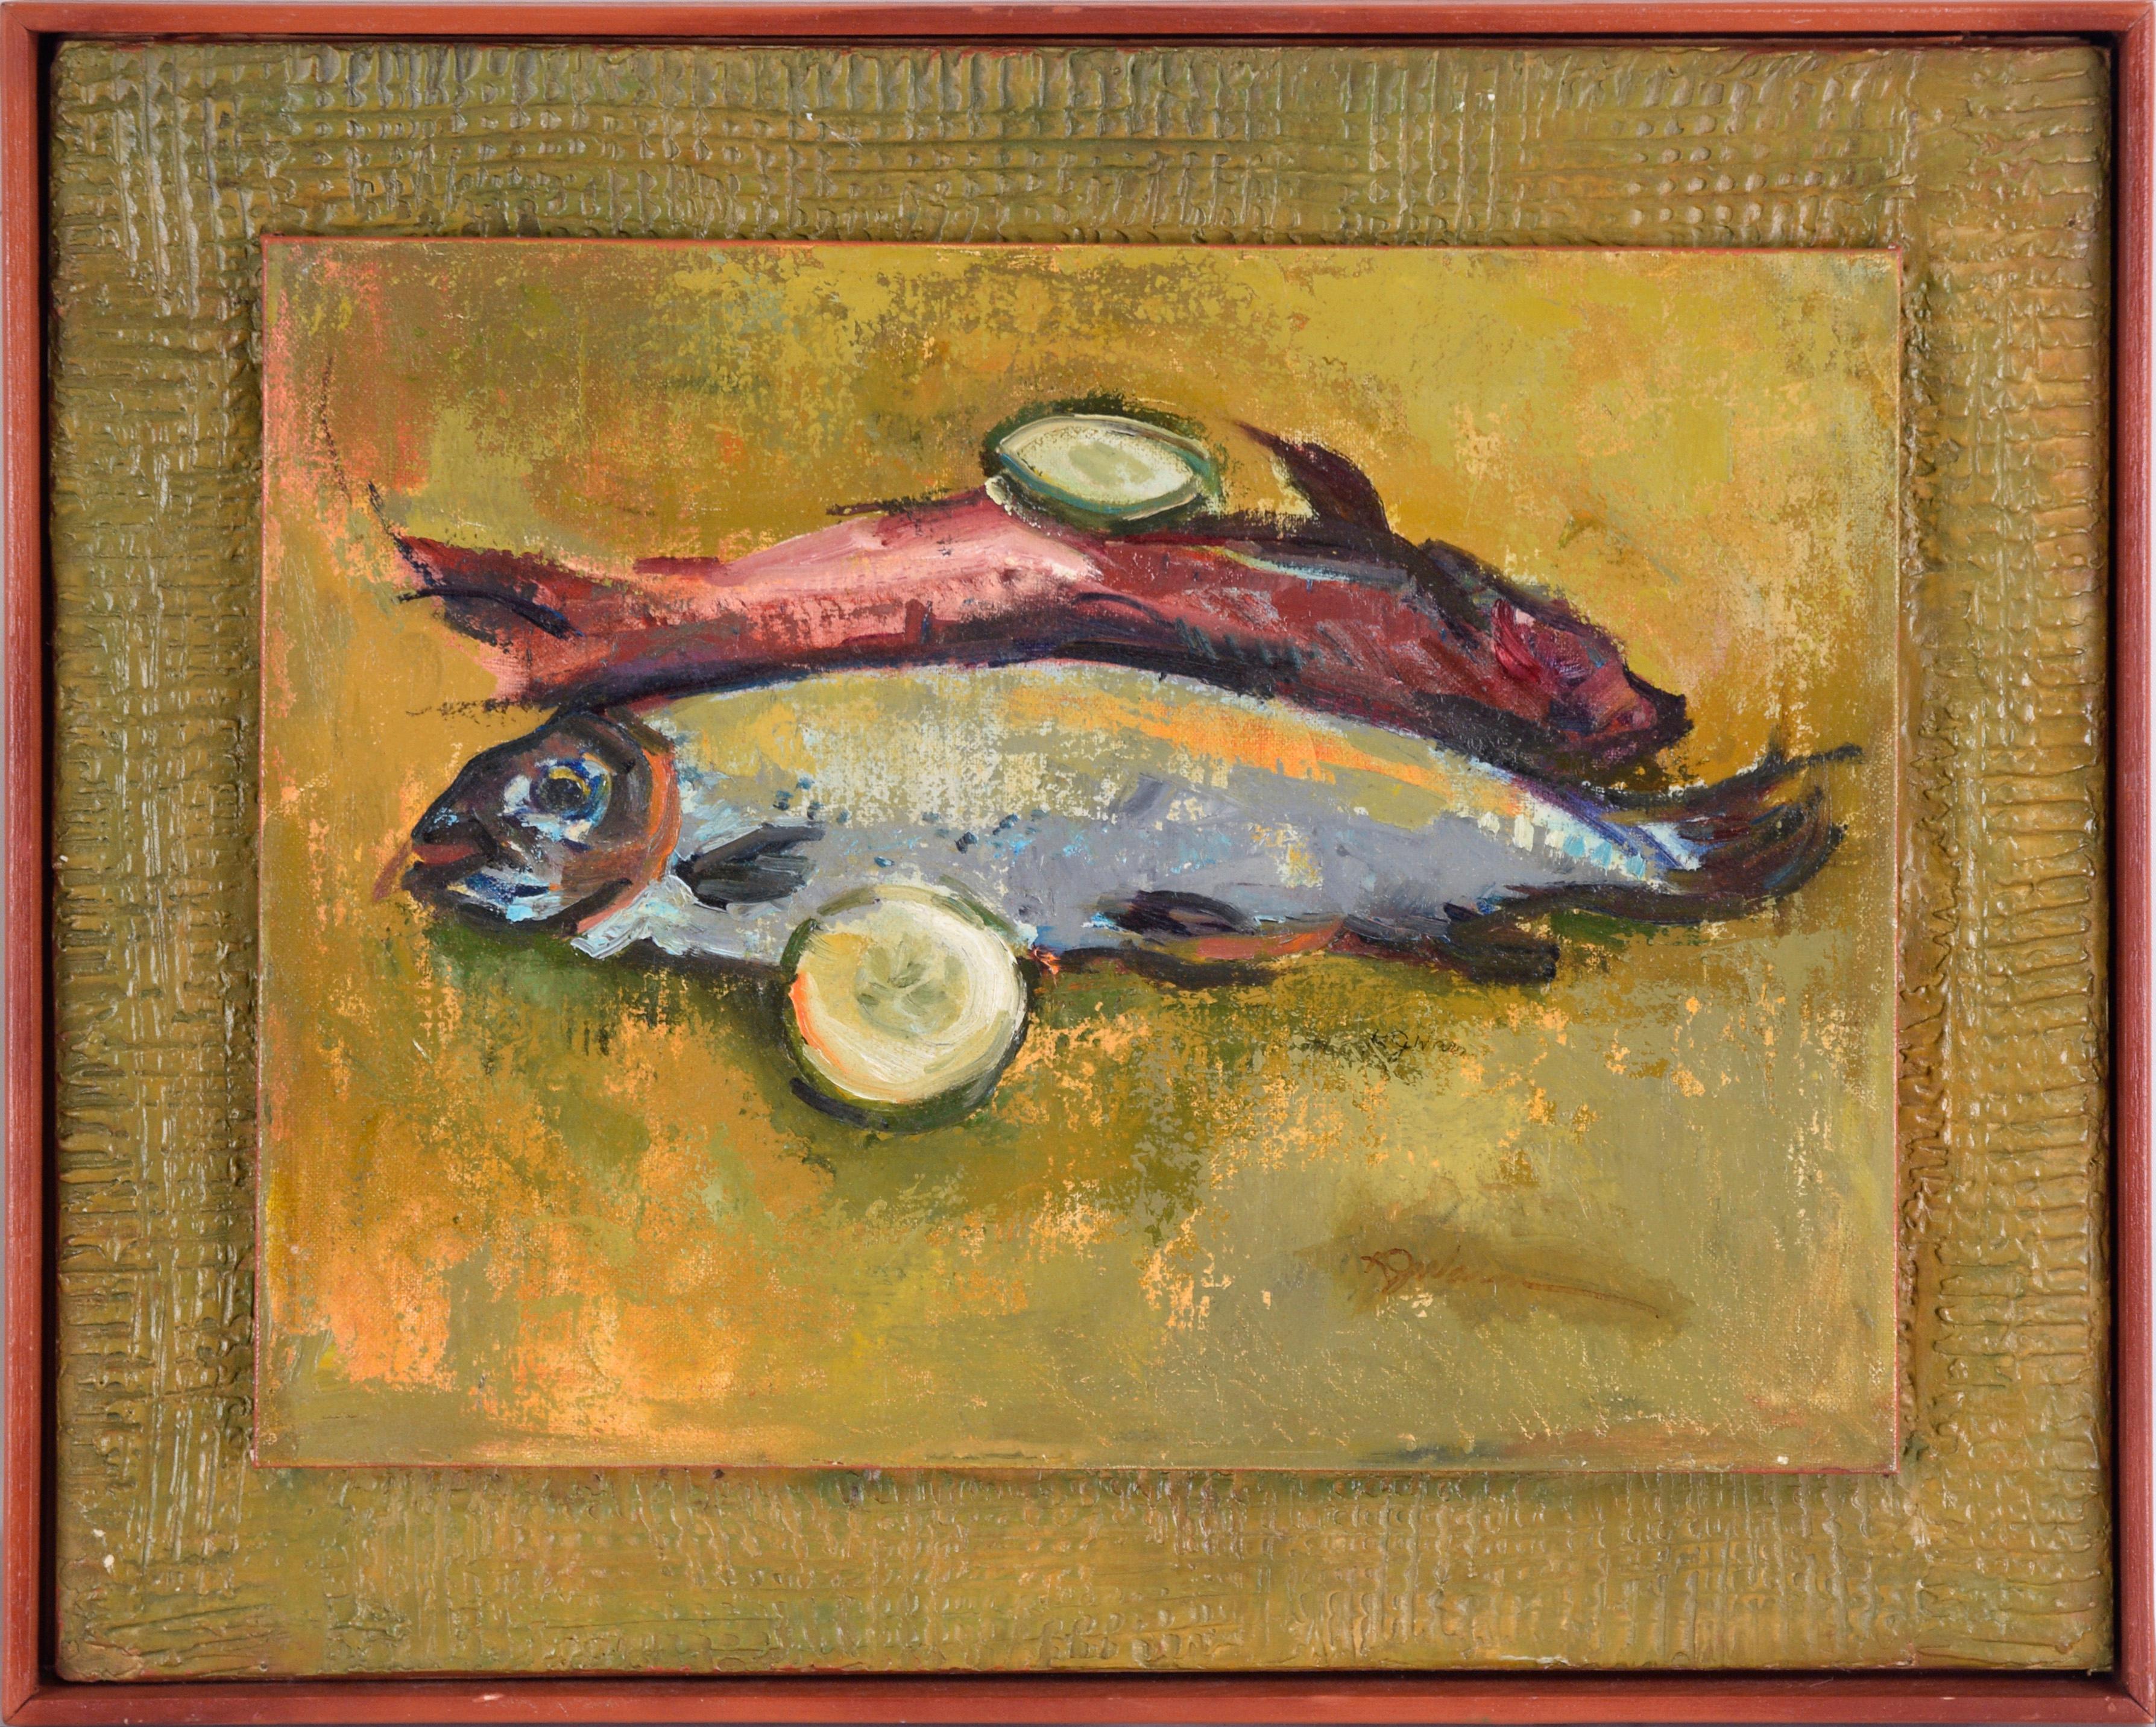 Unknown Still-Life Painting - Two Cooked Fish with Garnish - Still Life in Oil on Artist's Board